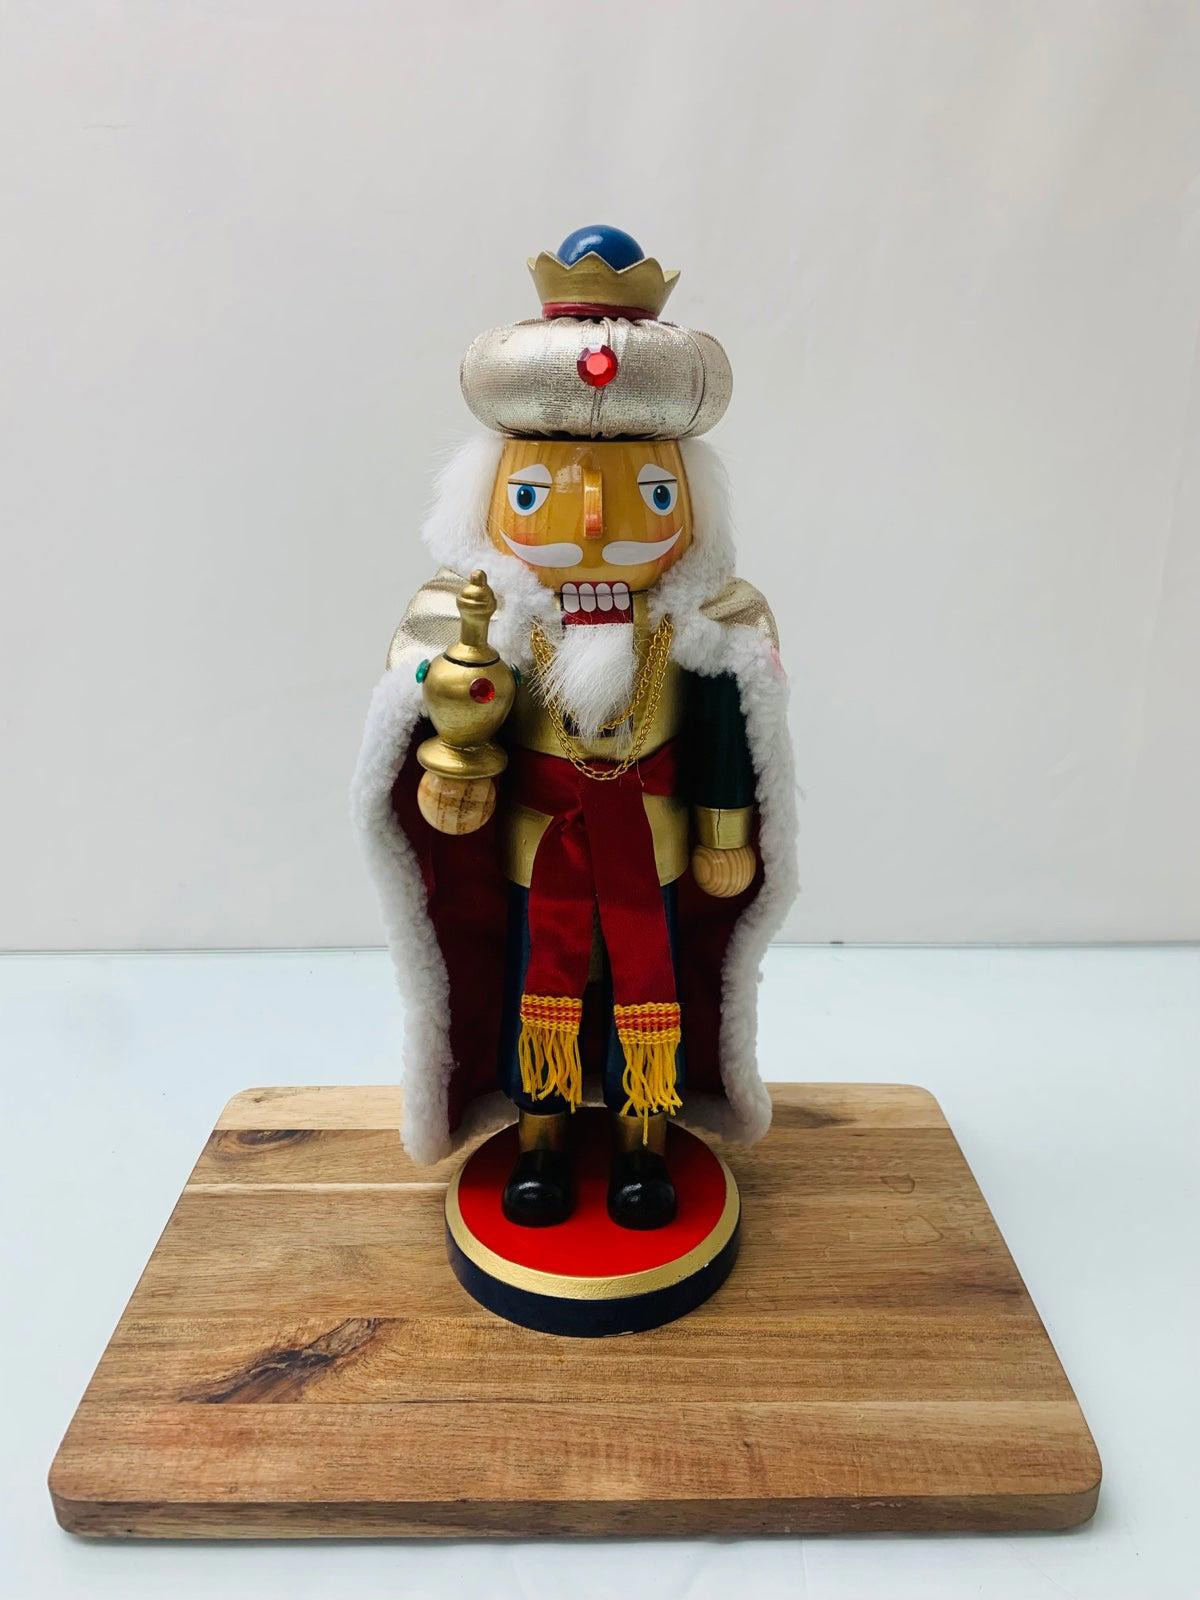 Gorgeous Tall Robed Chistmas Nutcracker 2004 Vintage